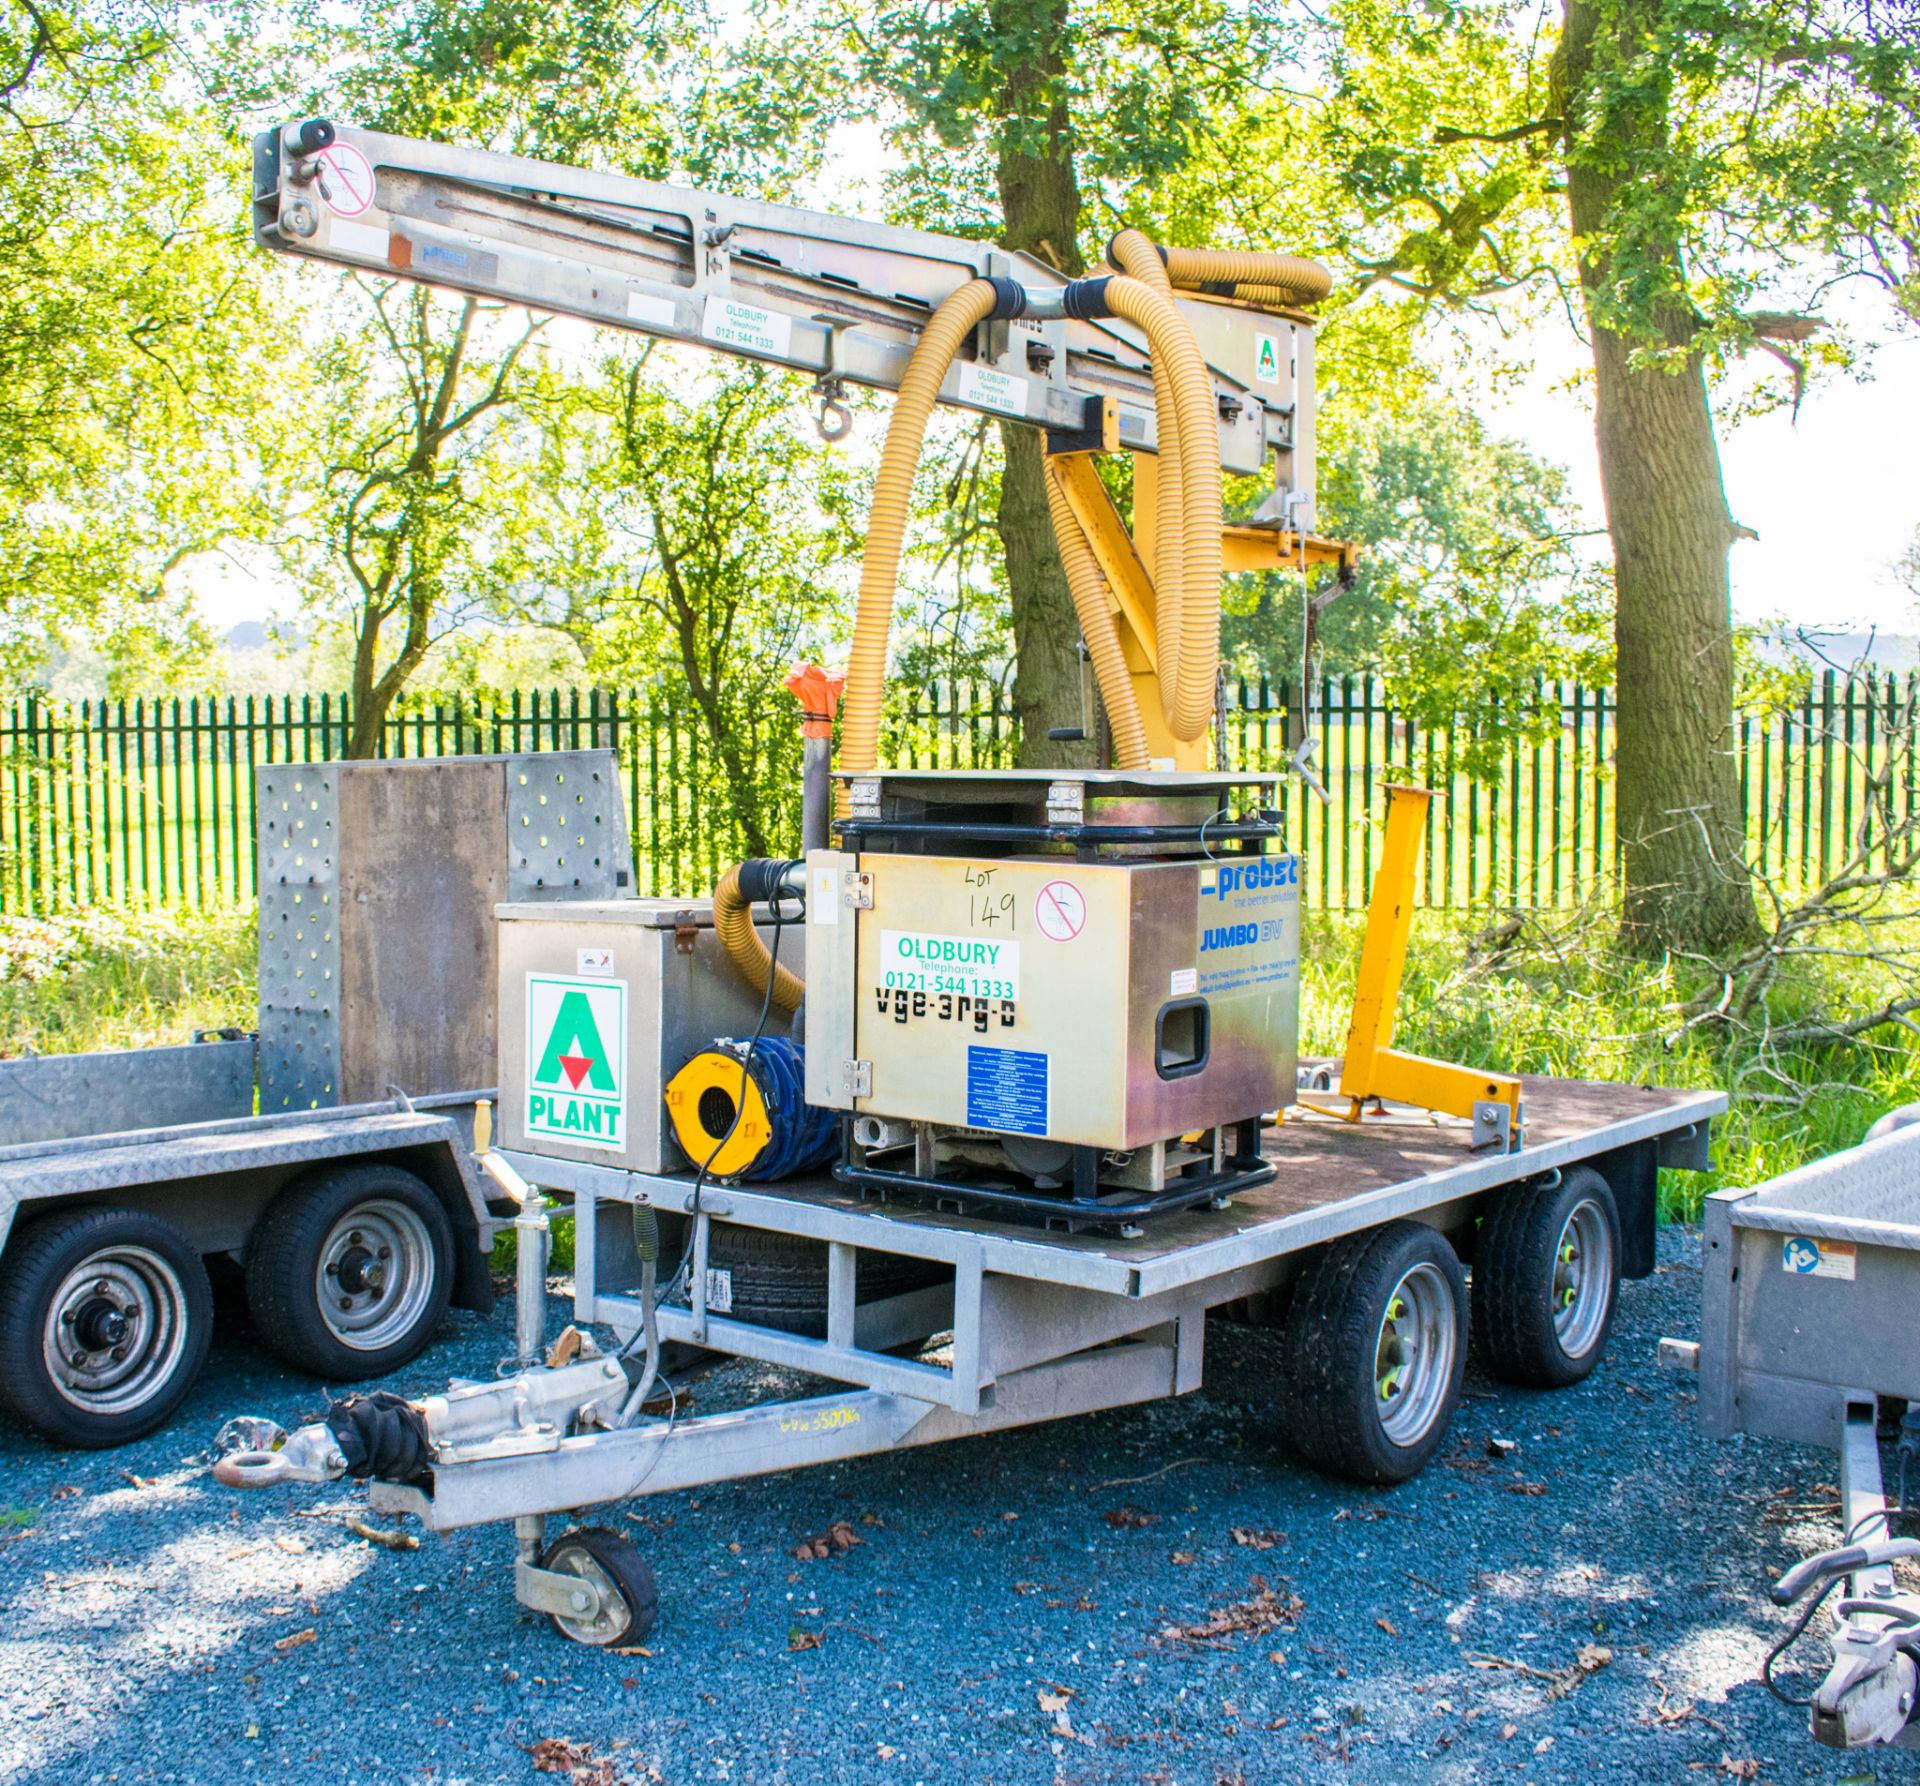 Probst petrol driven suction kerb/slab lifter  mounted on Gamic tandem axle plant trailer